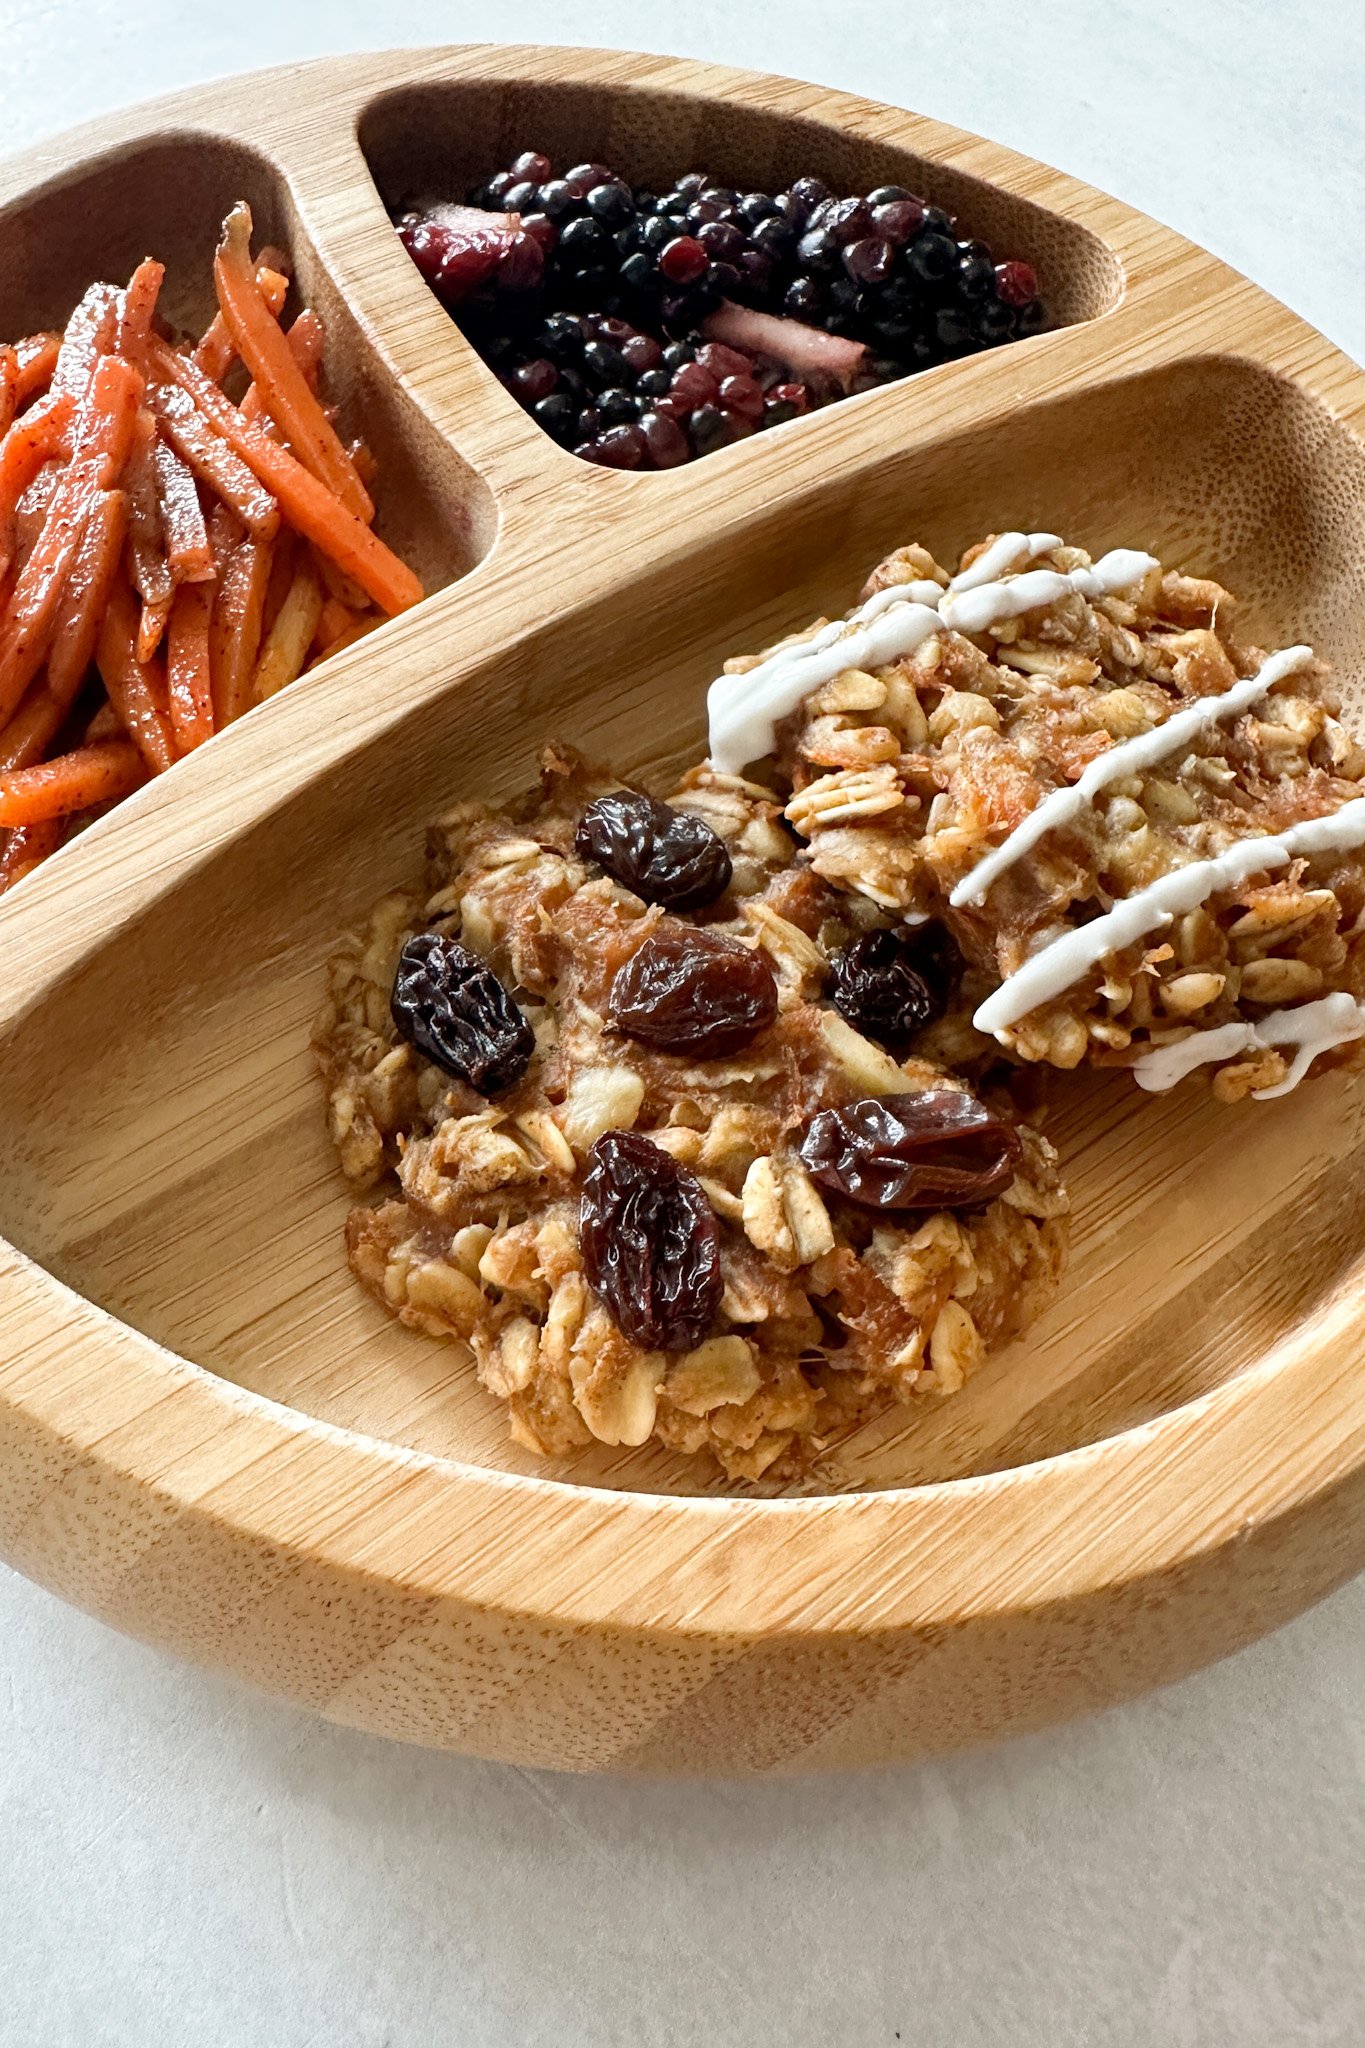 Carrot cake oatmeal cookies served with sauteed cinnamon carrots and blackberries.